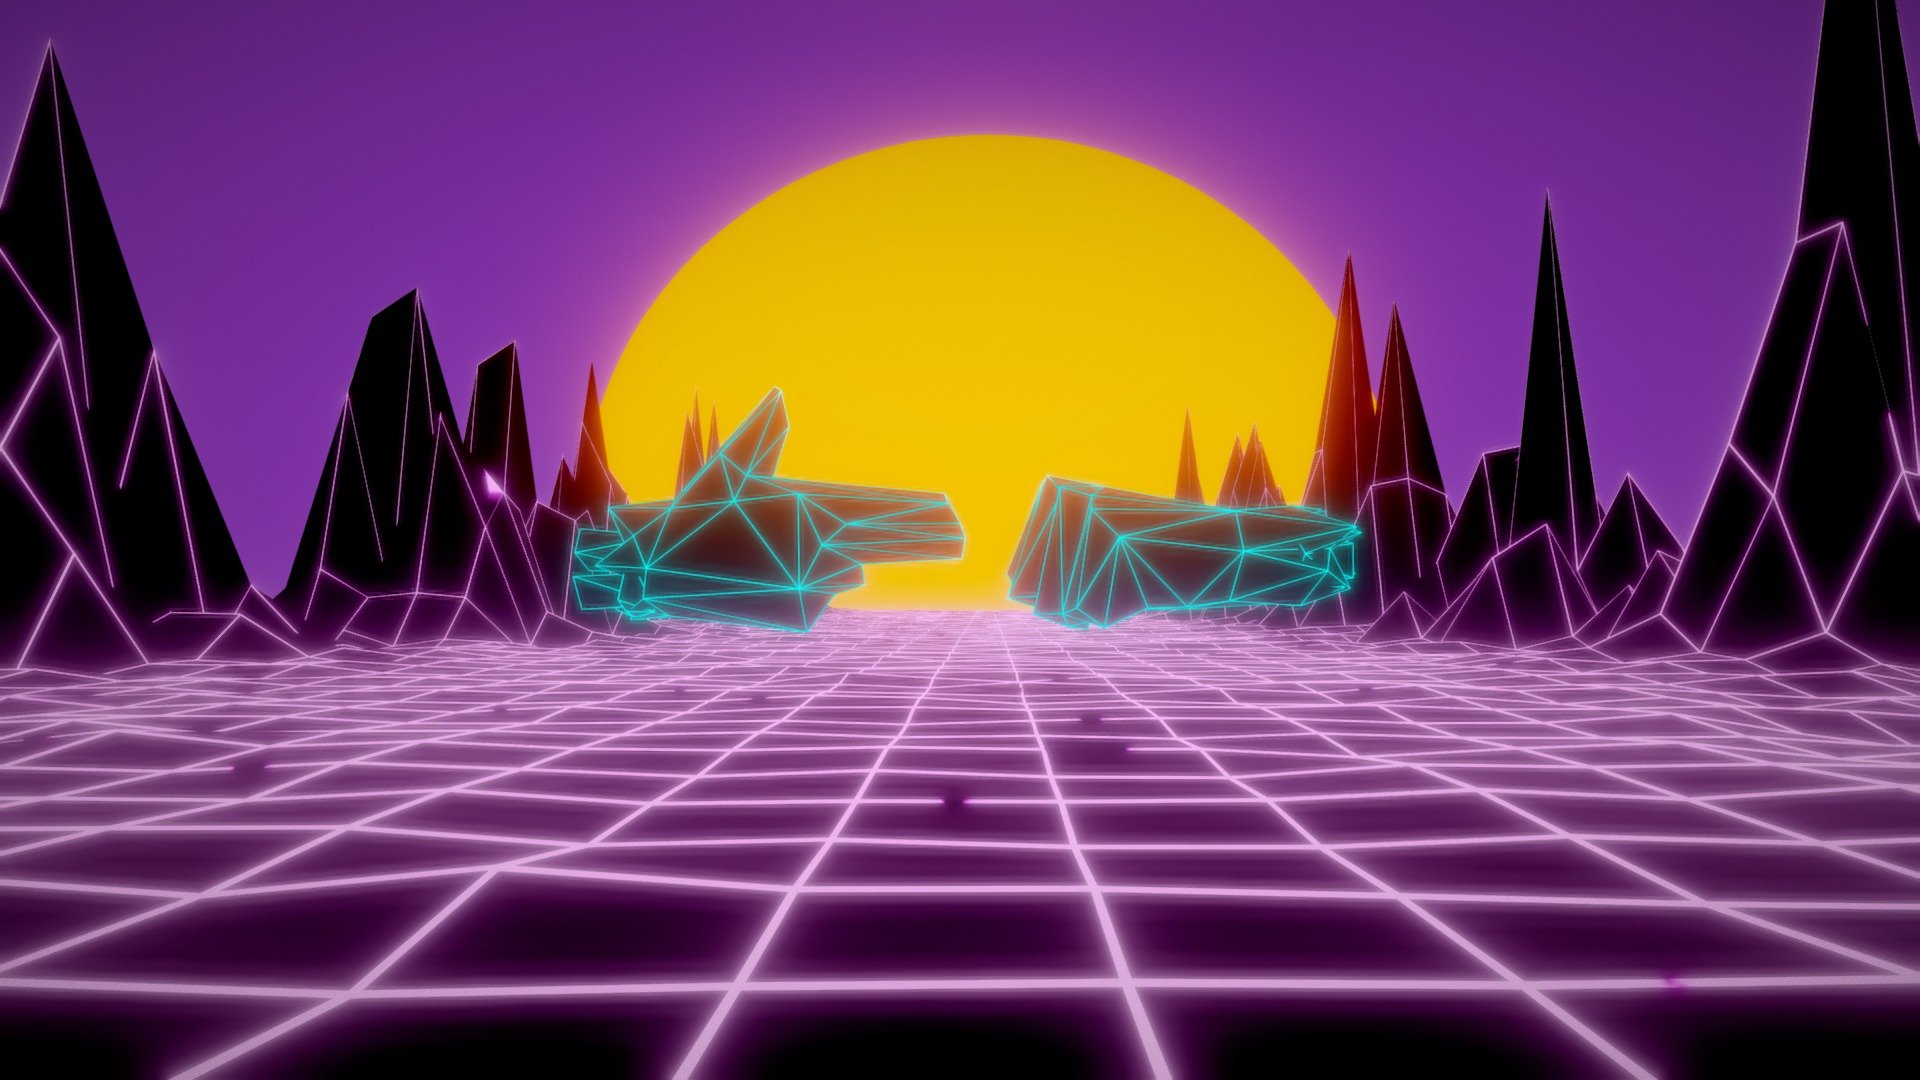 OutRun the Jewels is inspired by Run the Jewels + SketchFab's RTJ4D contest

Inspired by 80s Tron/Outrun vibes and of course Killer Mike and El-P

Based on &ldquo;RTJ Hands by RTJ, licensed under CC Attribution-NonCommercial-ShareAlike 3d model